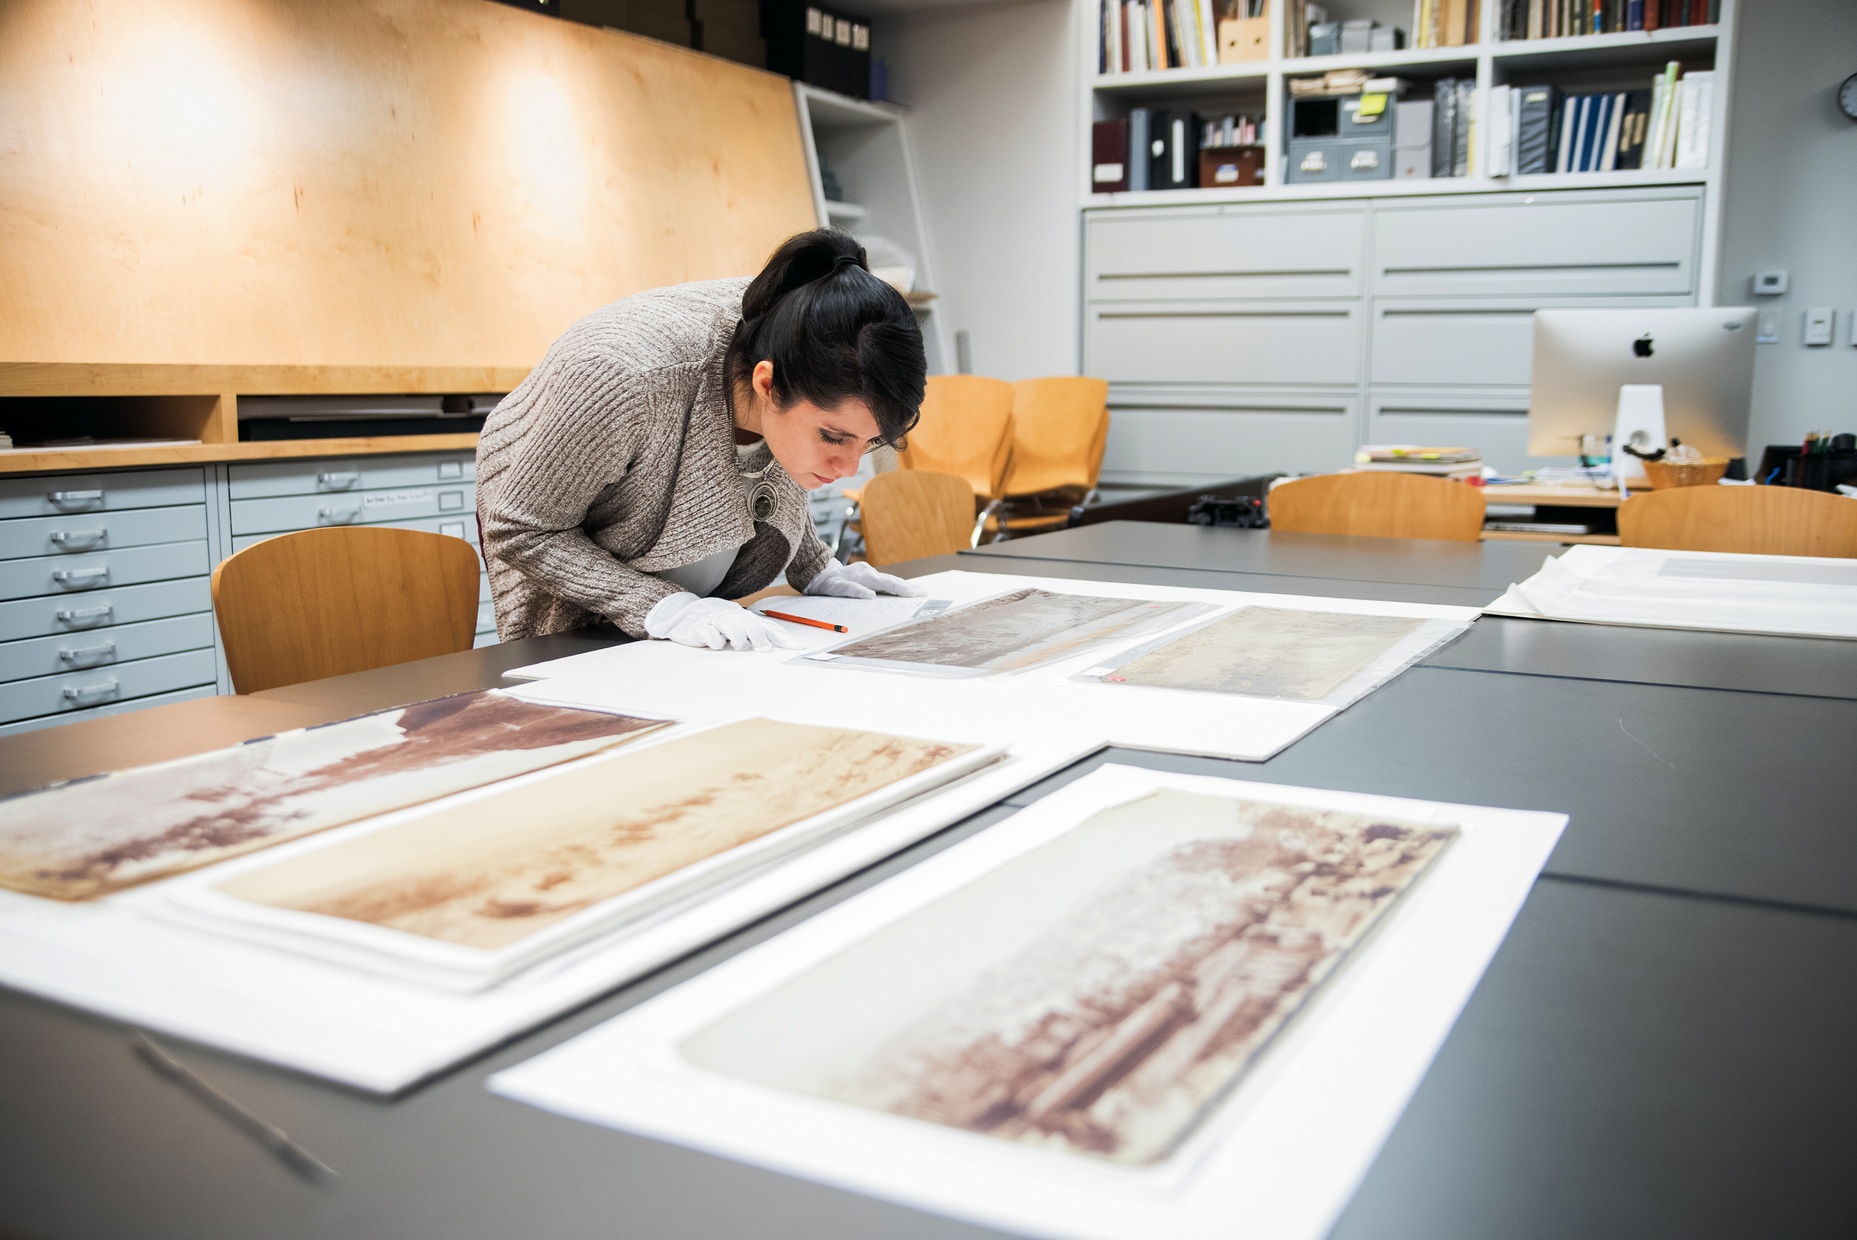 Ana-Joel Falcon-Wiebe, a light-skinned female, examines sepia-colored photographs depicting desert landscapes while wearing white gloves.